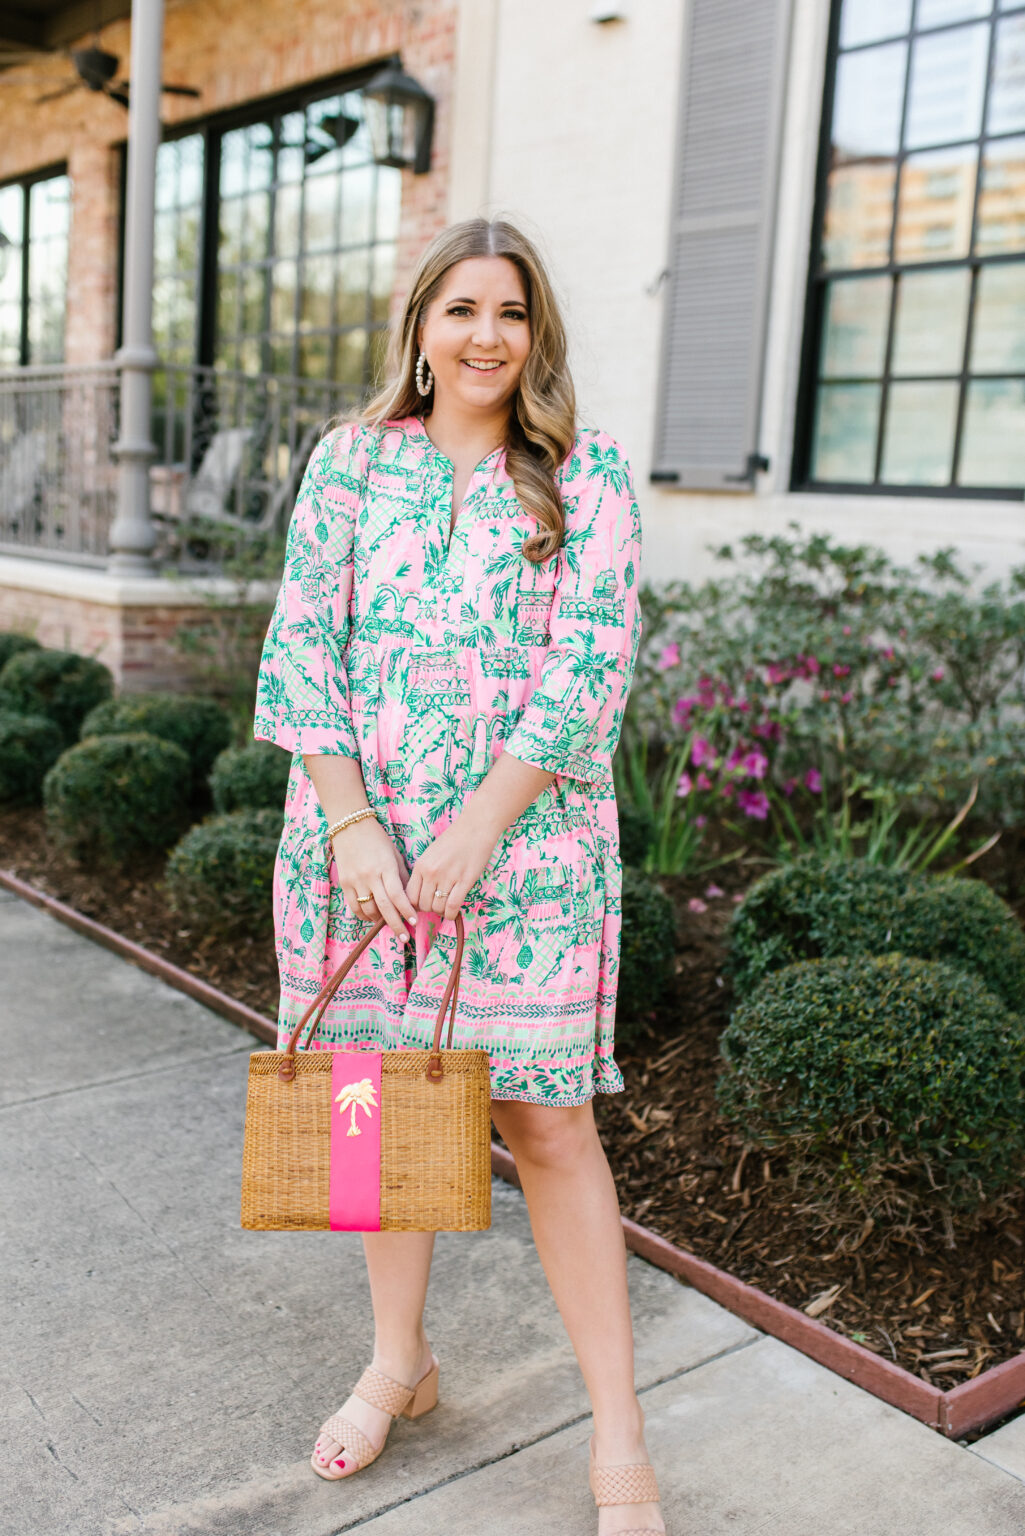 Lilly Pulitzer Dress Styled 2 Ways - Thrifty Pineapple